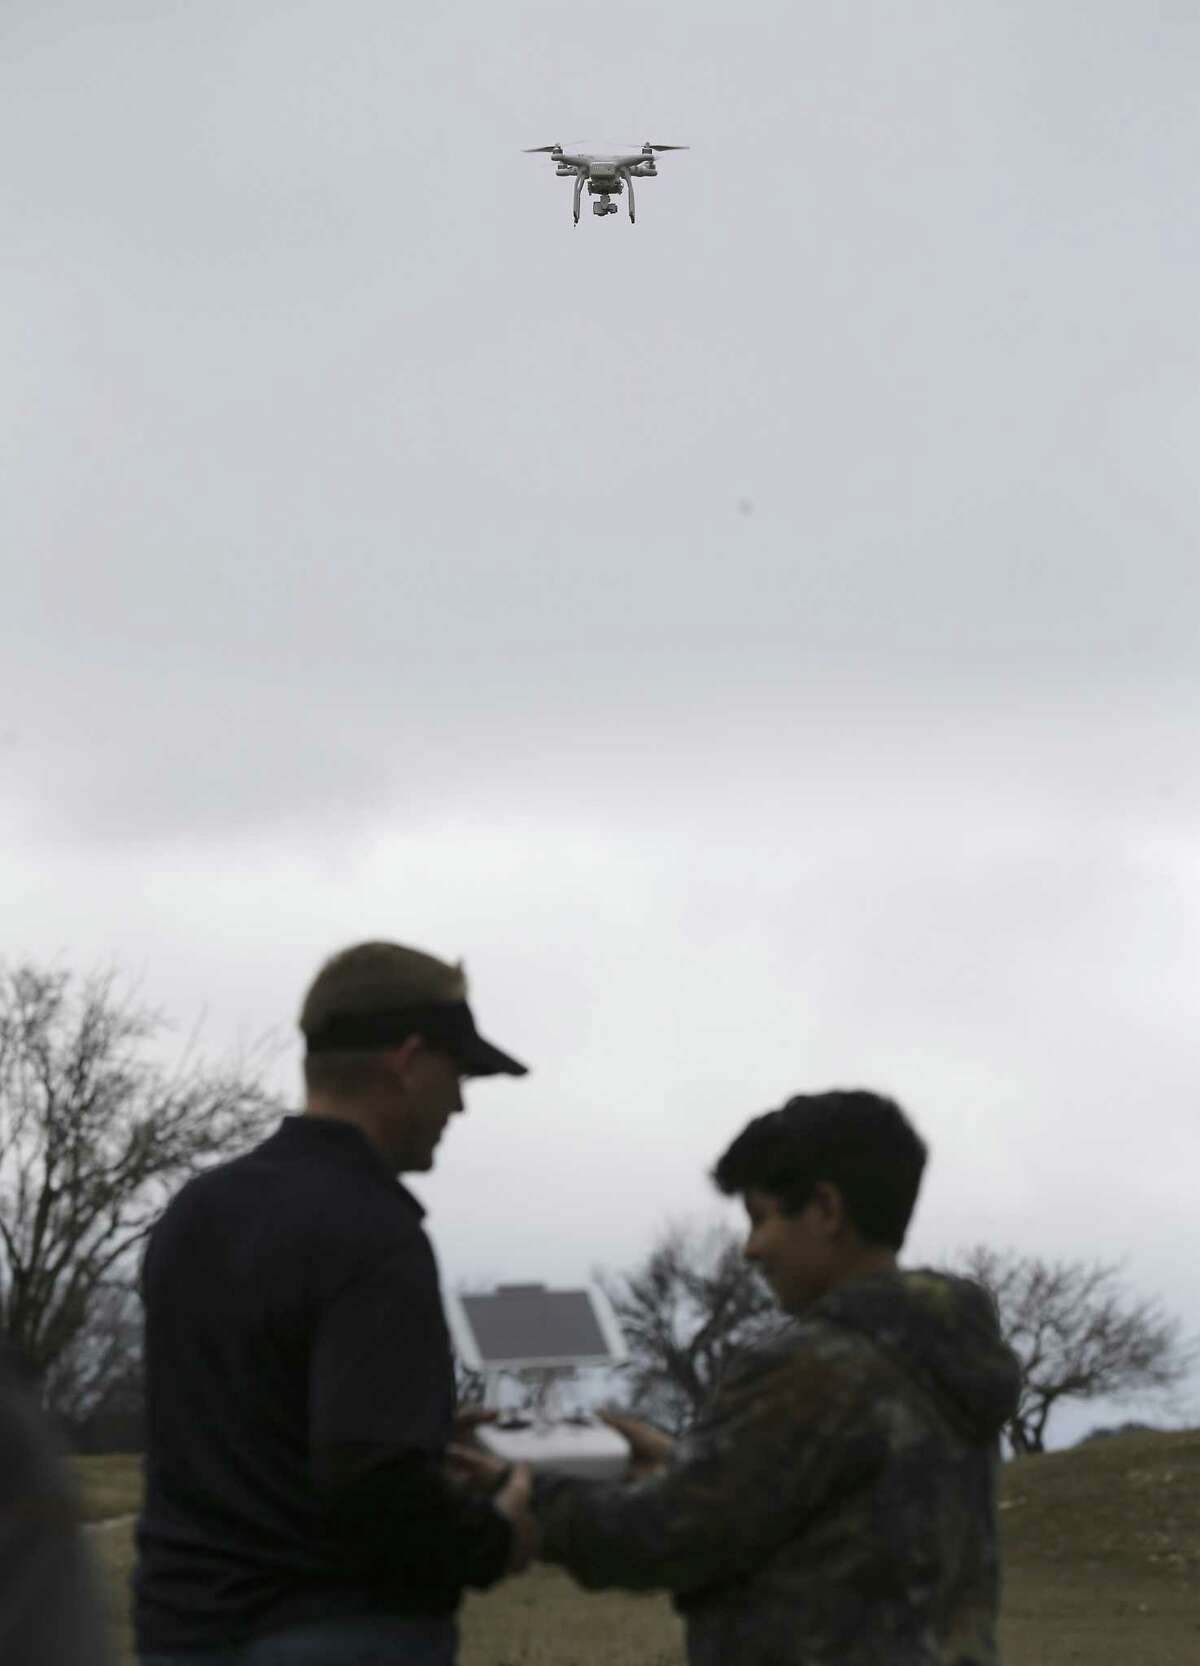 San Antonio Drones' Chris Fisher (left) shows Zeus Blowe, 11, how to fly a drone as hobbyists and the public attend the 2018 San Antonio Winterfest Drone Fly-in at the former Alamo Golf Course on Saturday, Feb. 10, 2018. The event featured flying demonstrations, workshops and exhibits on the Northwest Side. The event was held in what is called Class G airspace, which has no restrictions on drone flight other than basic rules. (Kin Man Hui/San Antonio Express-News)